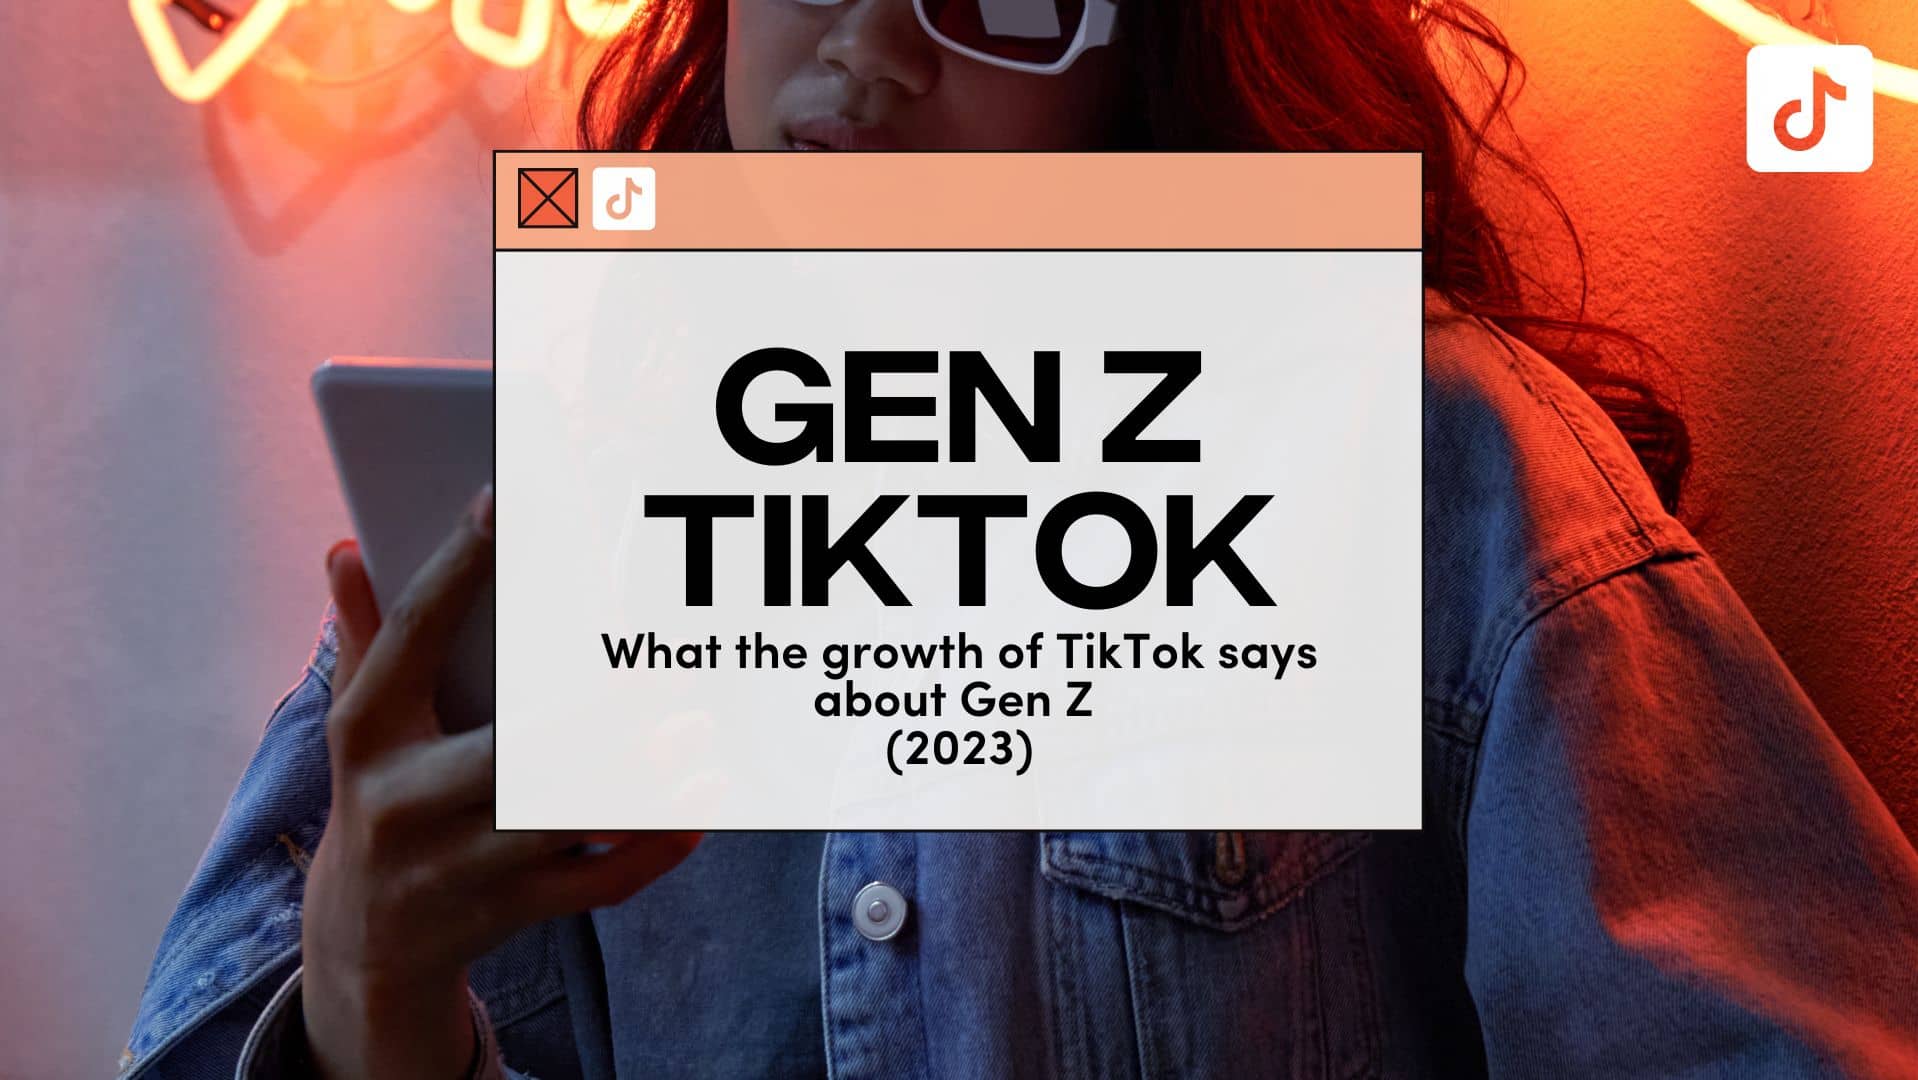 What are the Gen Z trends on TikTok?